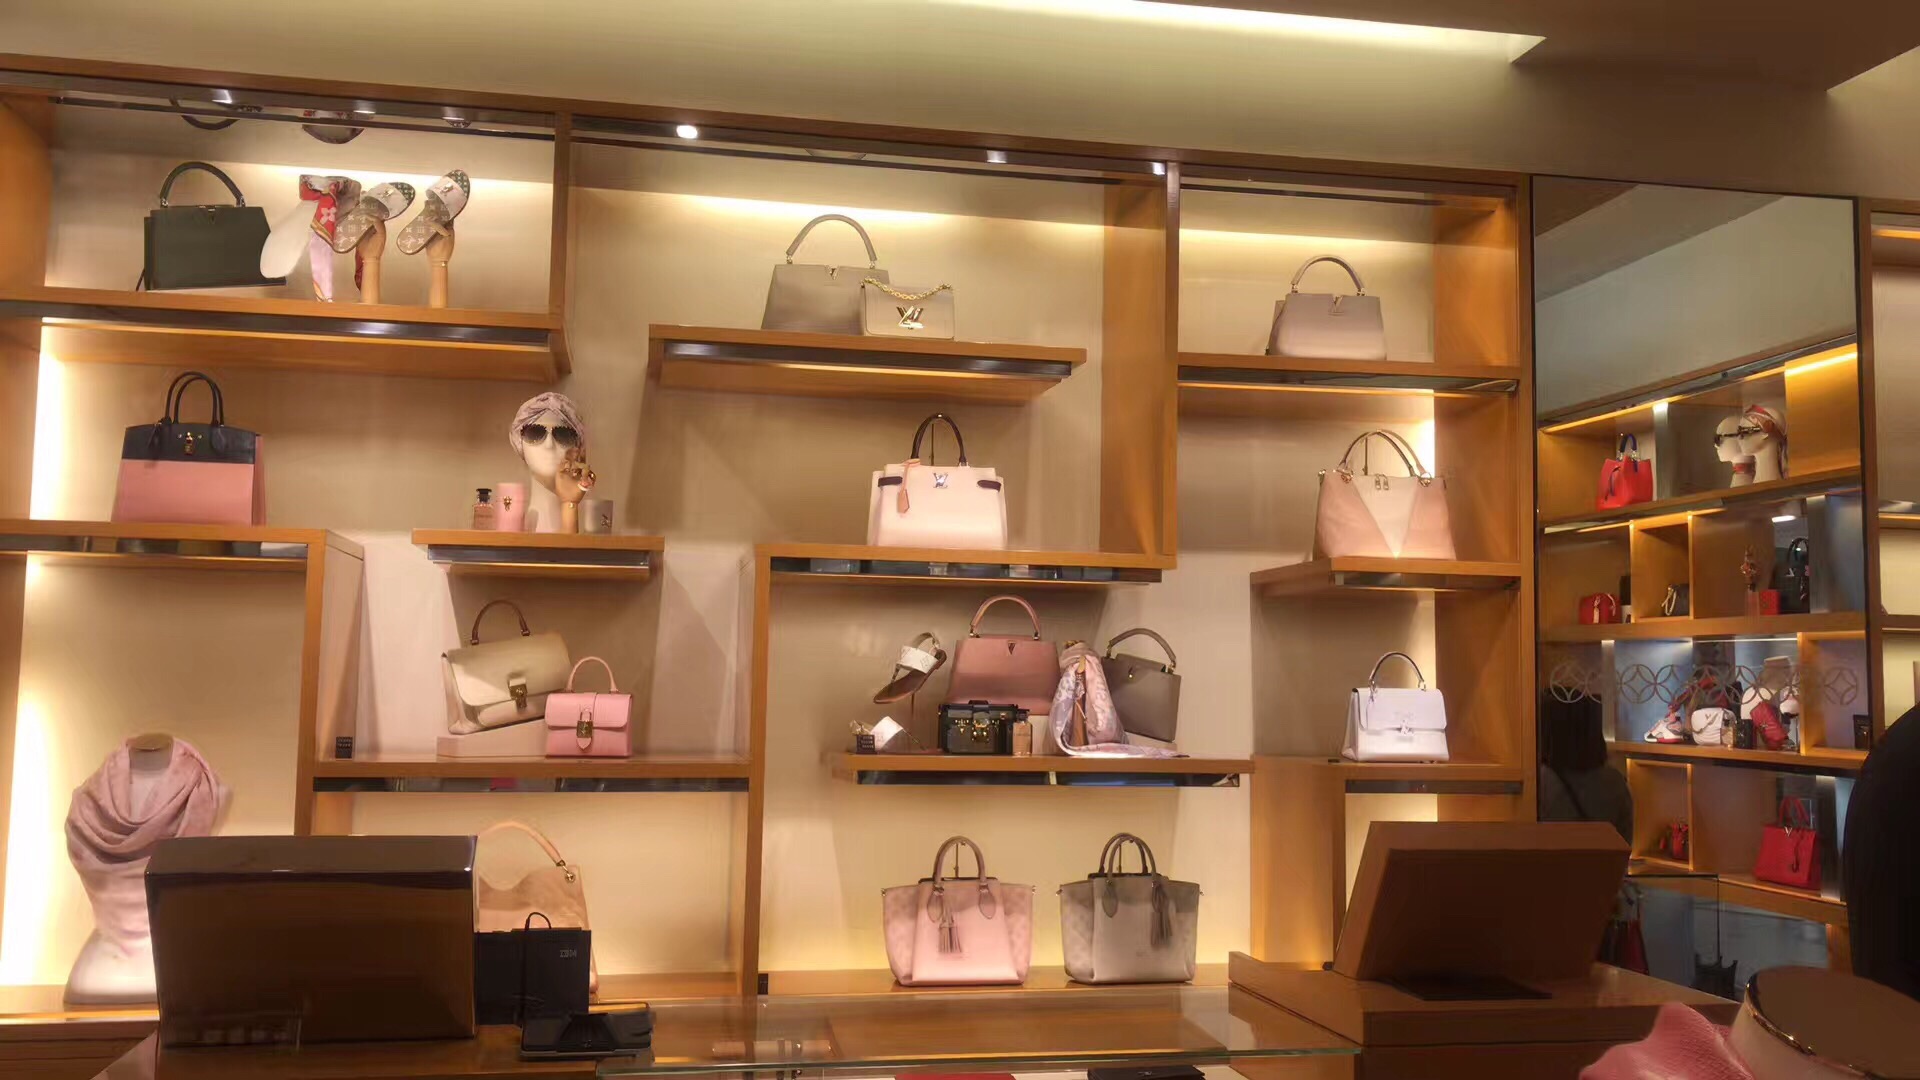 Shopping itineraries in Louis Vuitton Warsaw in August (updated in